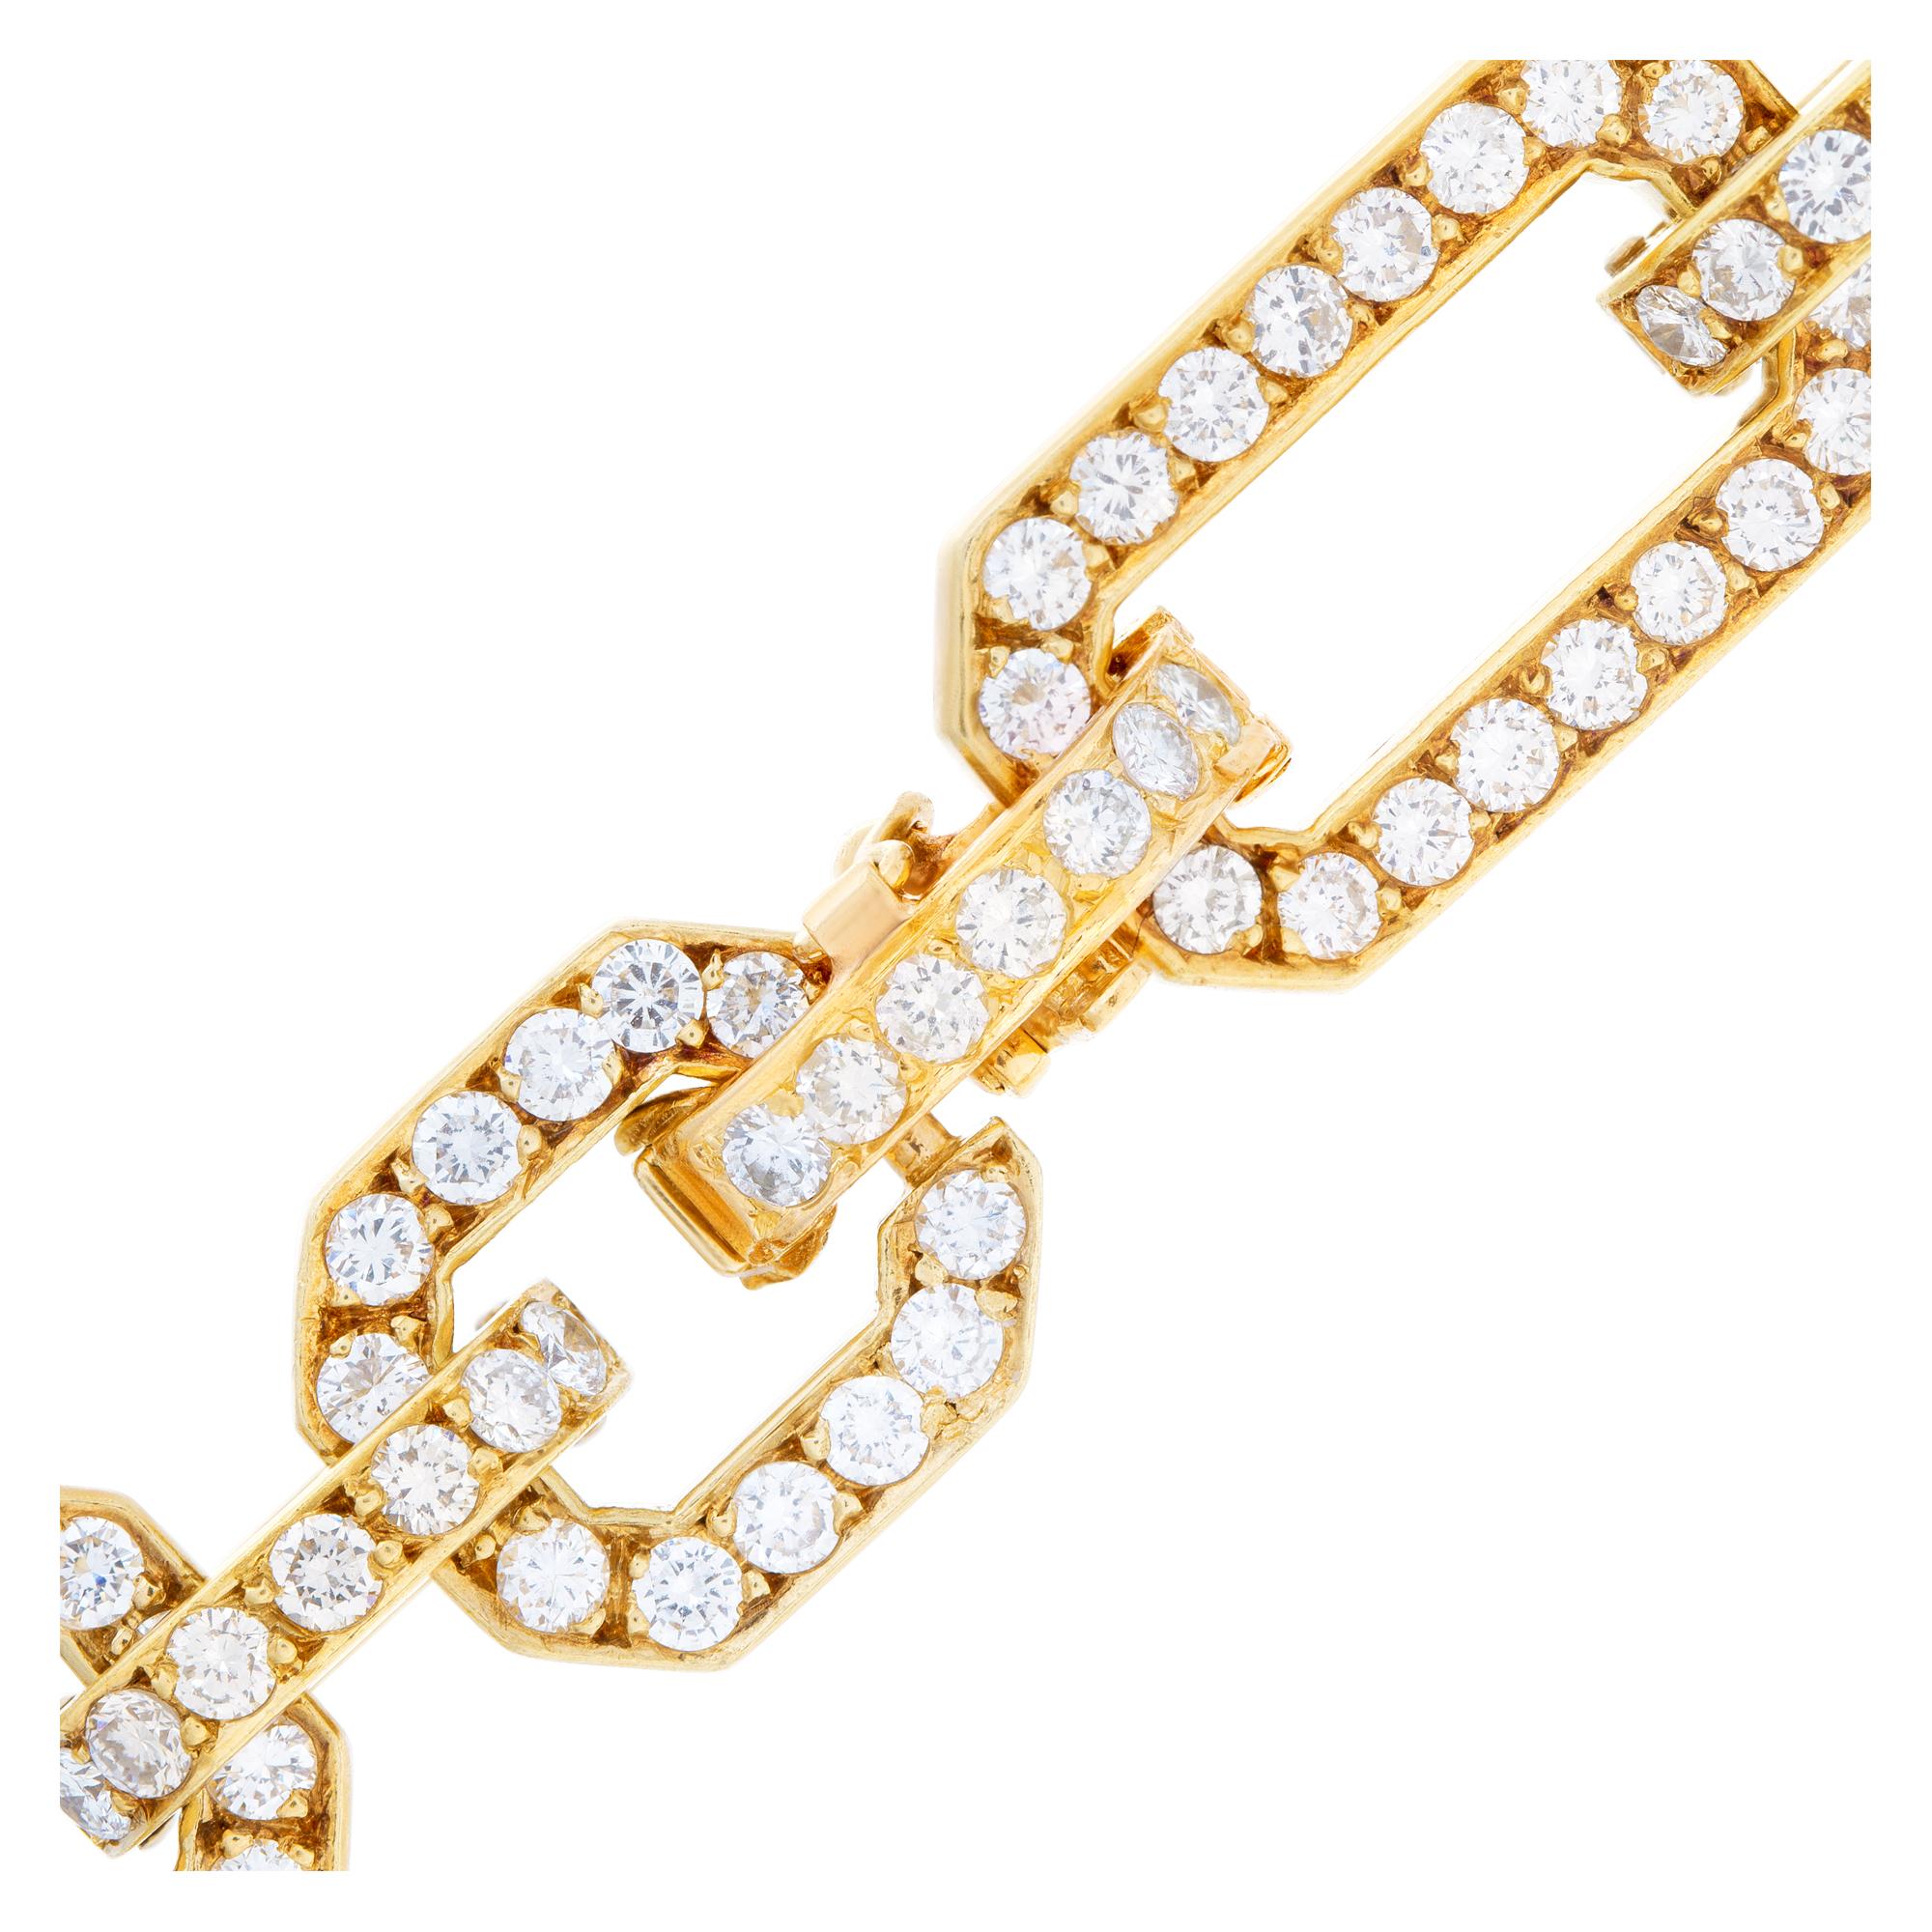 Geometric sparkling necklace with approx. 16 carats, full cut round brilliant and baguette diamonds set in 18K yelllow gold. Diamond are estimated G-H color, VVS-VS clarity. 15 inches long and 1 1/4